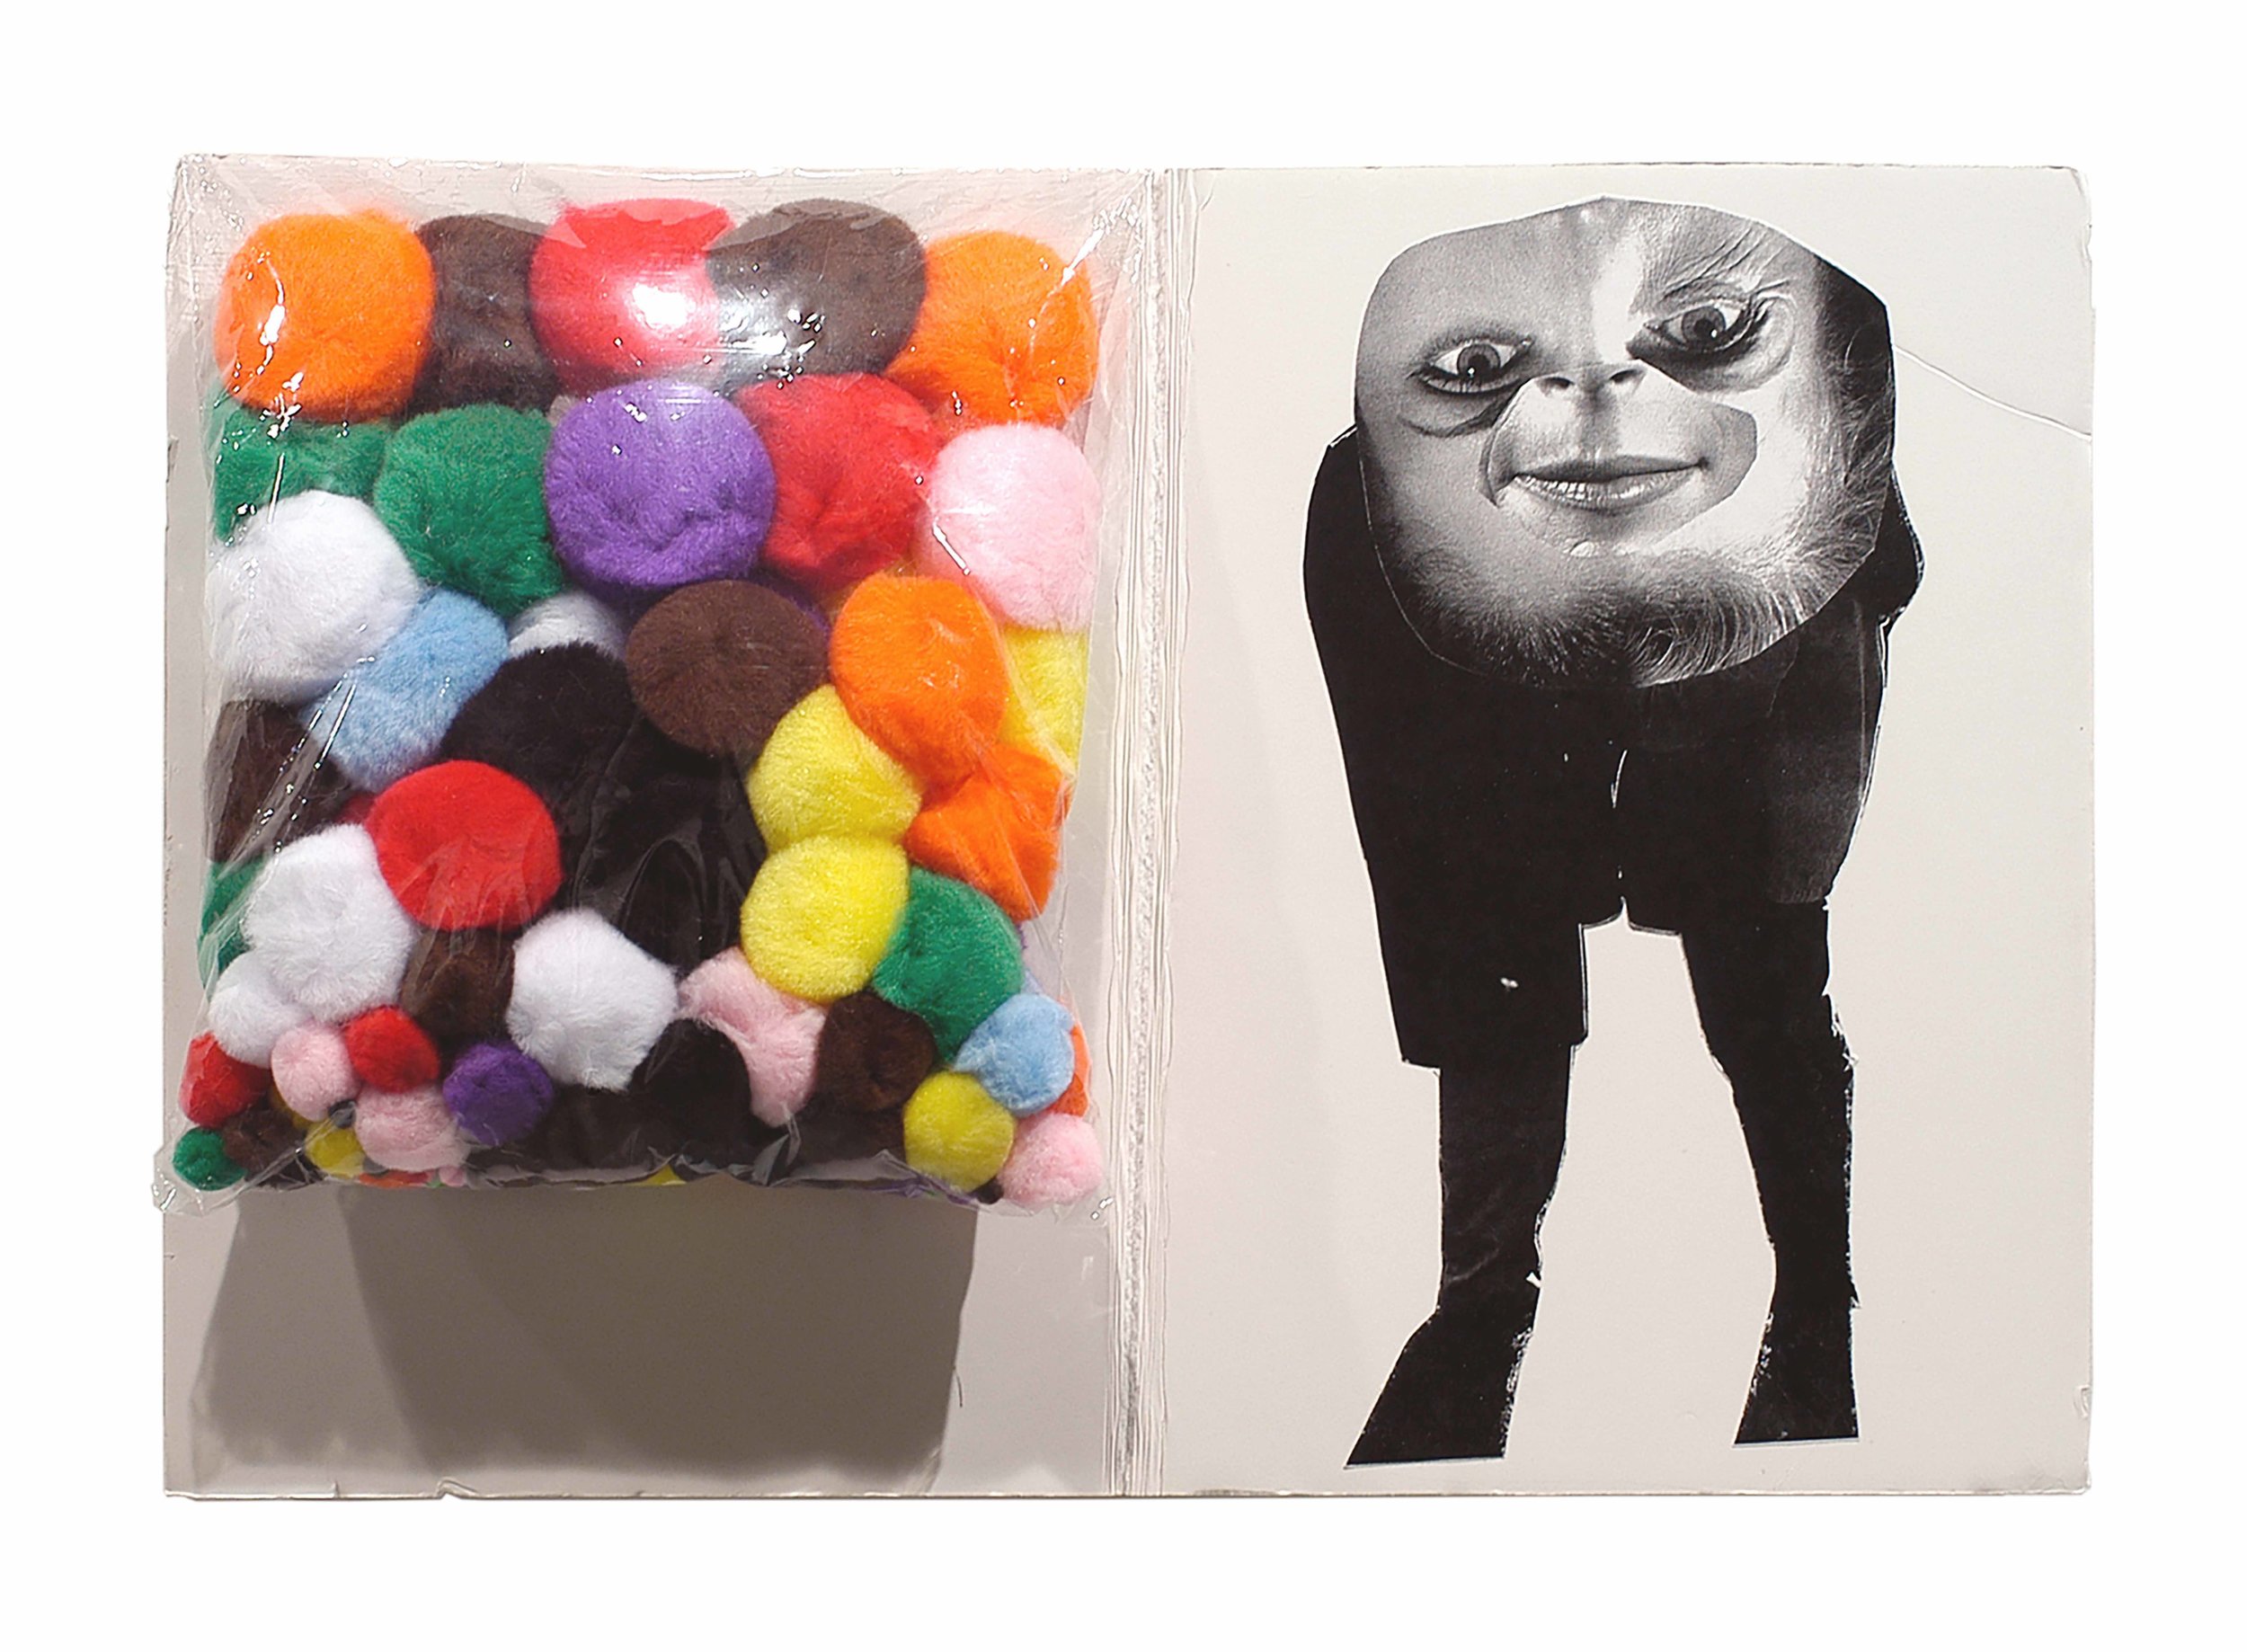  Drew Beattie  Spots &nbsp; 2005 collage, plastic and puff balls on foam core on canvas&nbsp; 12½ x 17¾ inches 